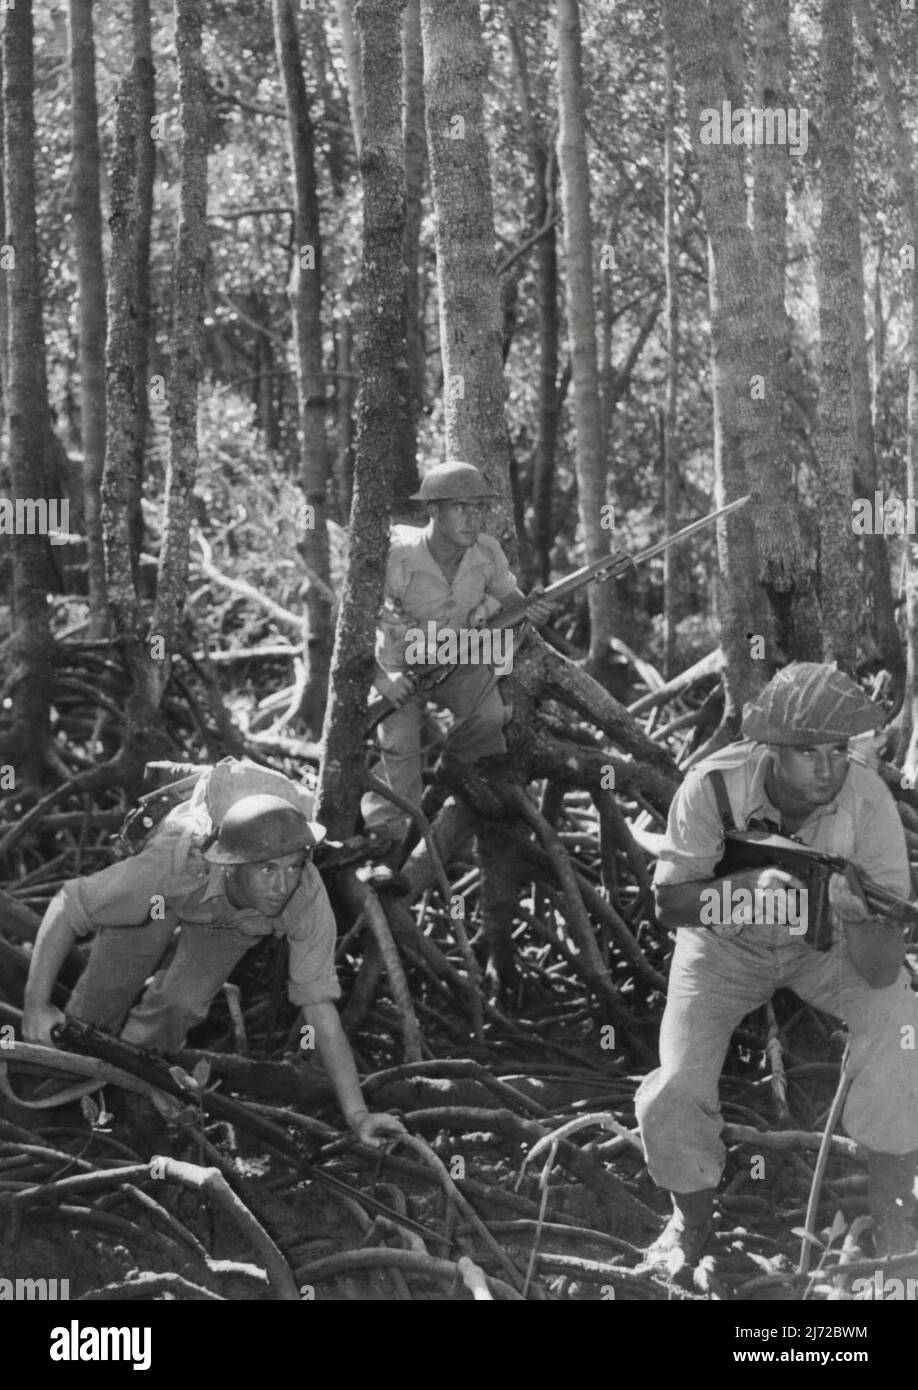 Infantry Training In North-West Area -- Training for Australian soldiers in thick mangrove swamps. Picture show troops advancing cautiously over tangled roots of mangroves in swampy country. August 16, 1943. (Photo by H. Rodda). Stock Photo